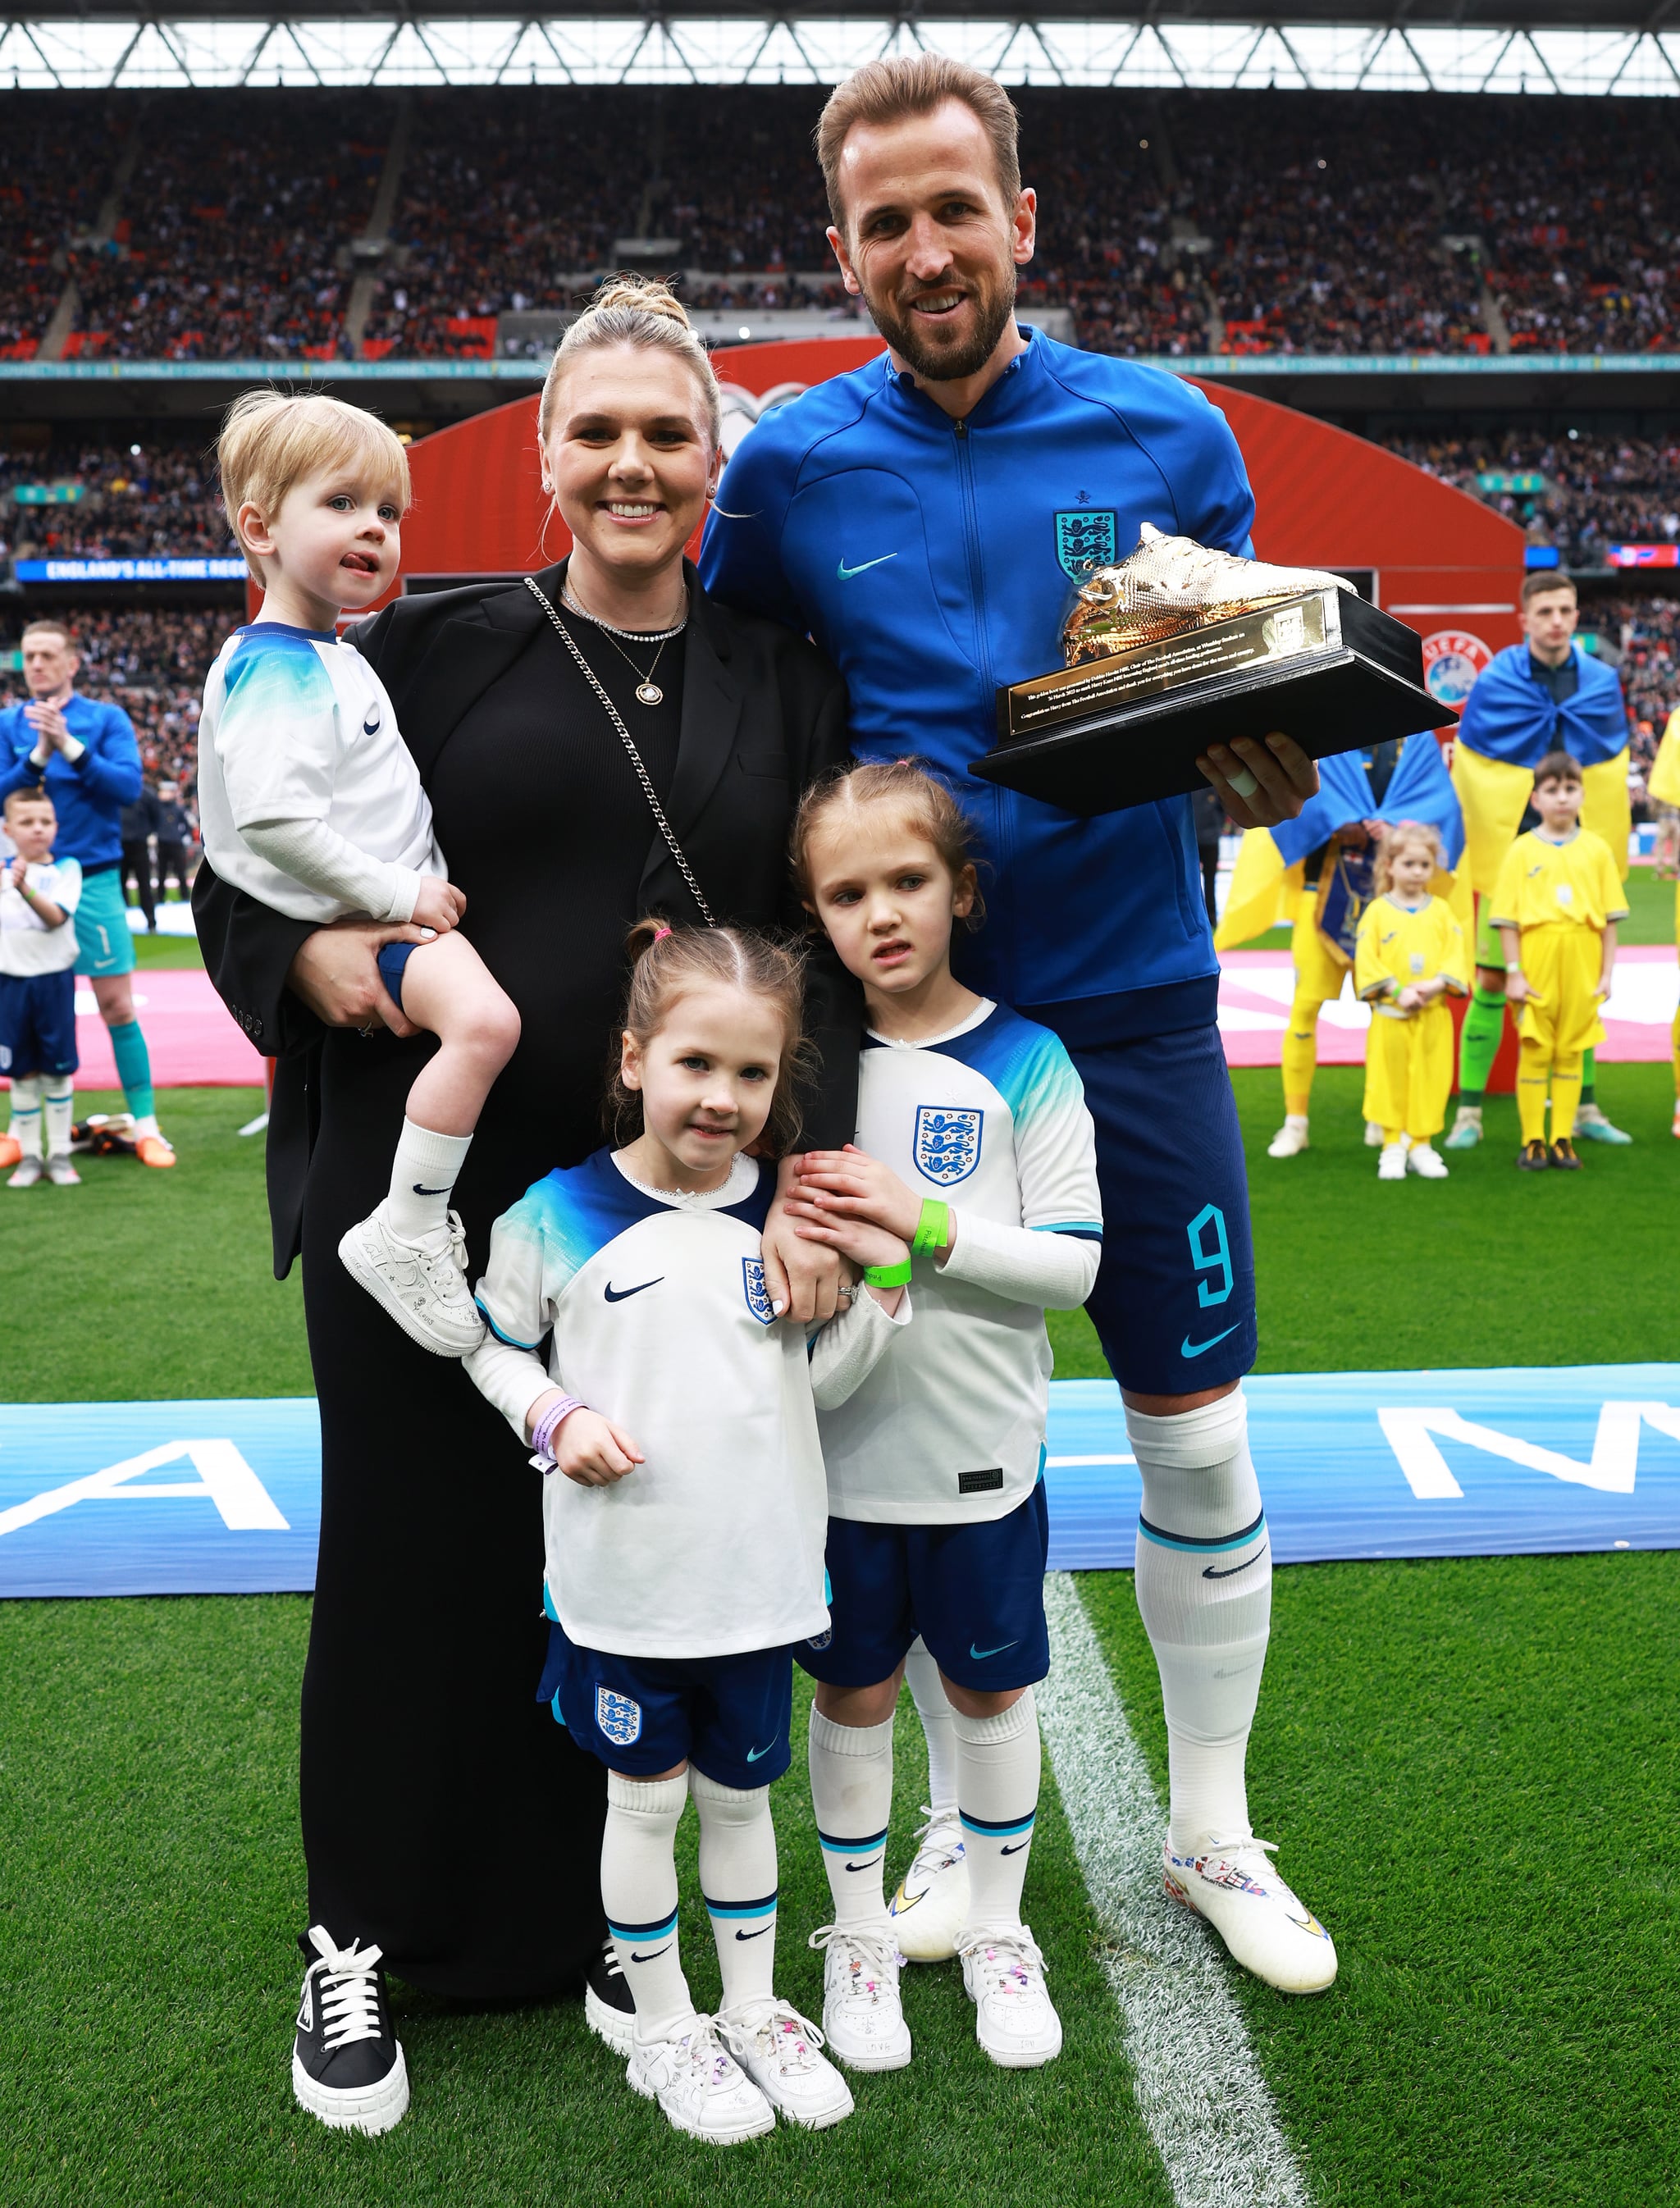 LONDON, ENGLAND - MARCH 26: Harry Kane of England poses with their Golden Boot trophy alongside their Wife, Katie Goodland and Children, Ivy Jane Kane, Vivienne Jane Kane and Louis Harry Kane prior to the UEFA EURO 2024 qualifying round group C match between England and Ukraine at Wembley Stadium on March 26, 2023 in London, England. (Photo by Eddie Keogh - The FA/The FA via Getty Images)